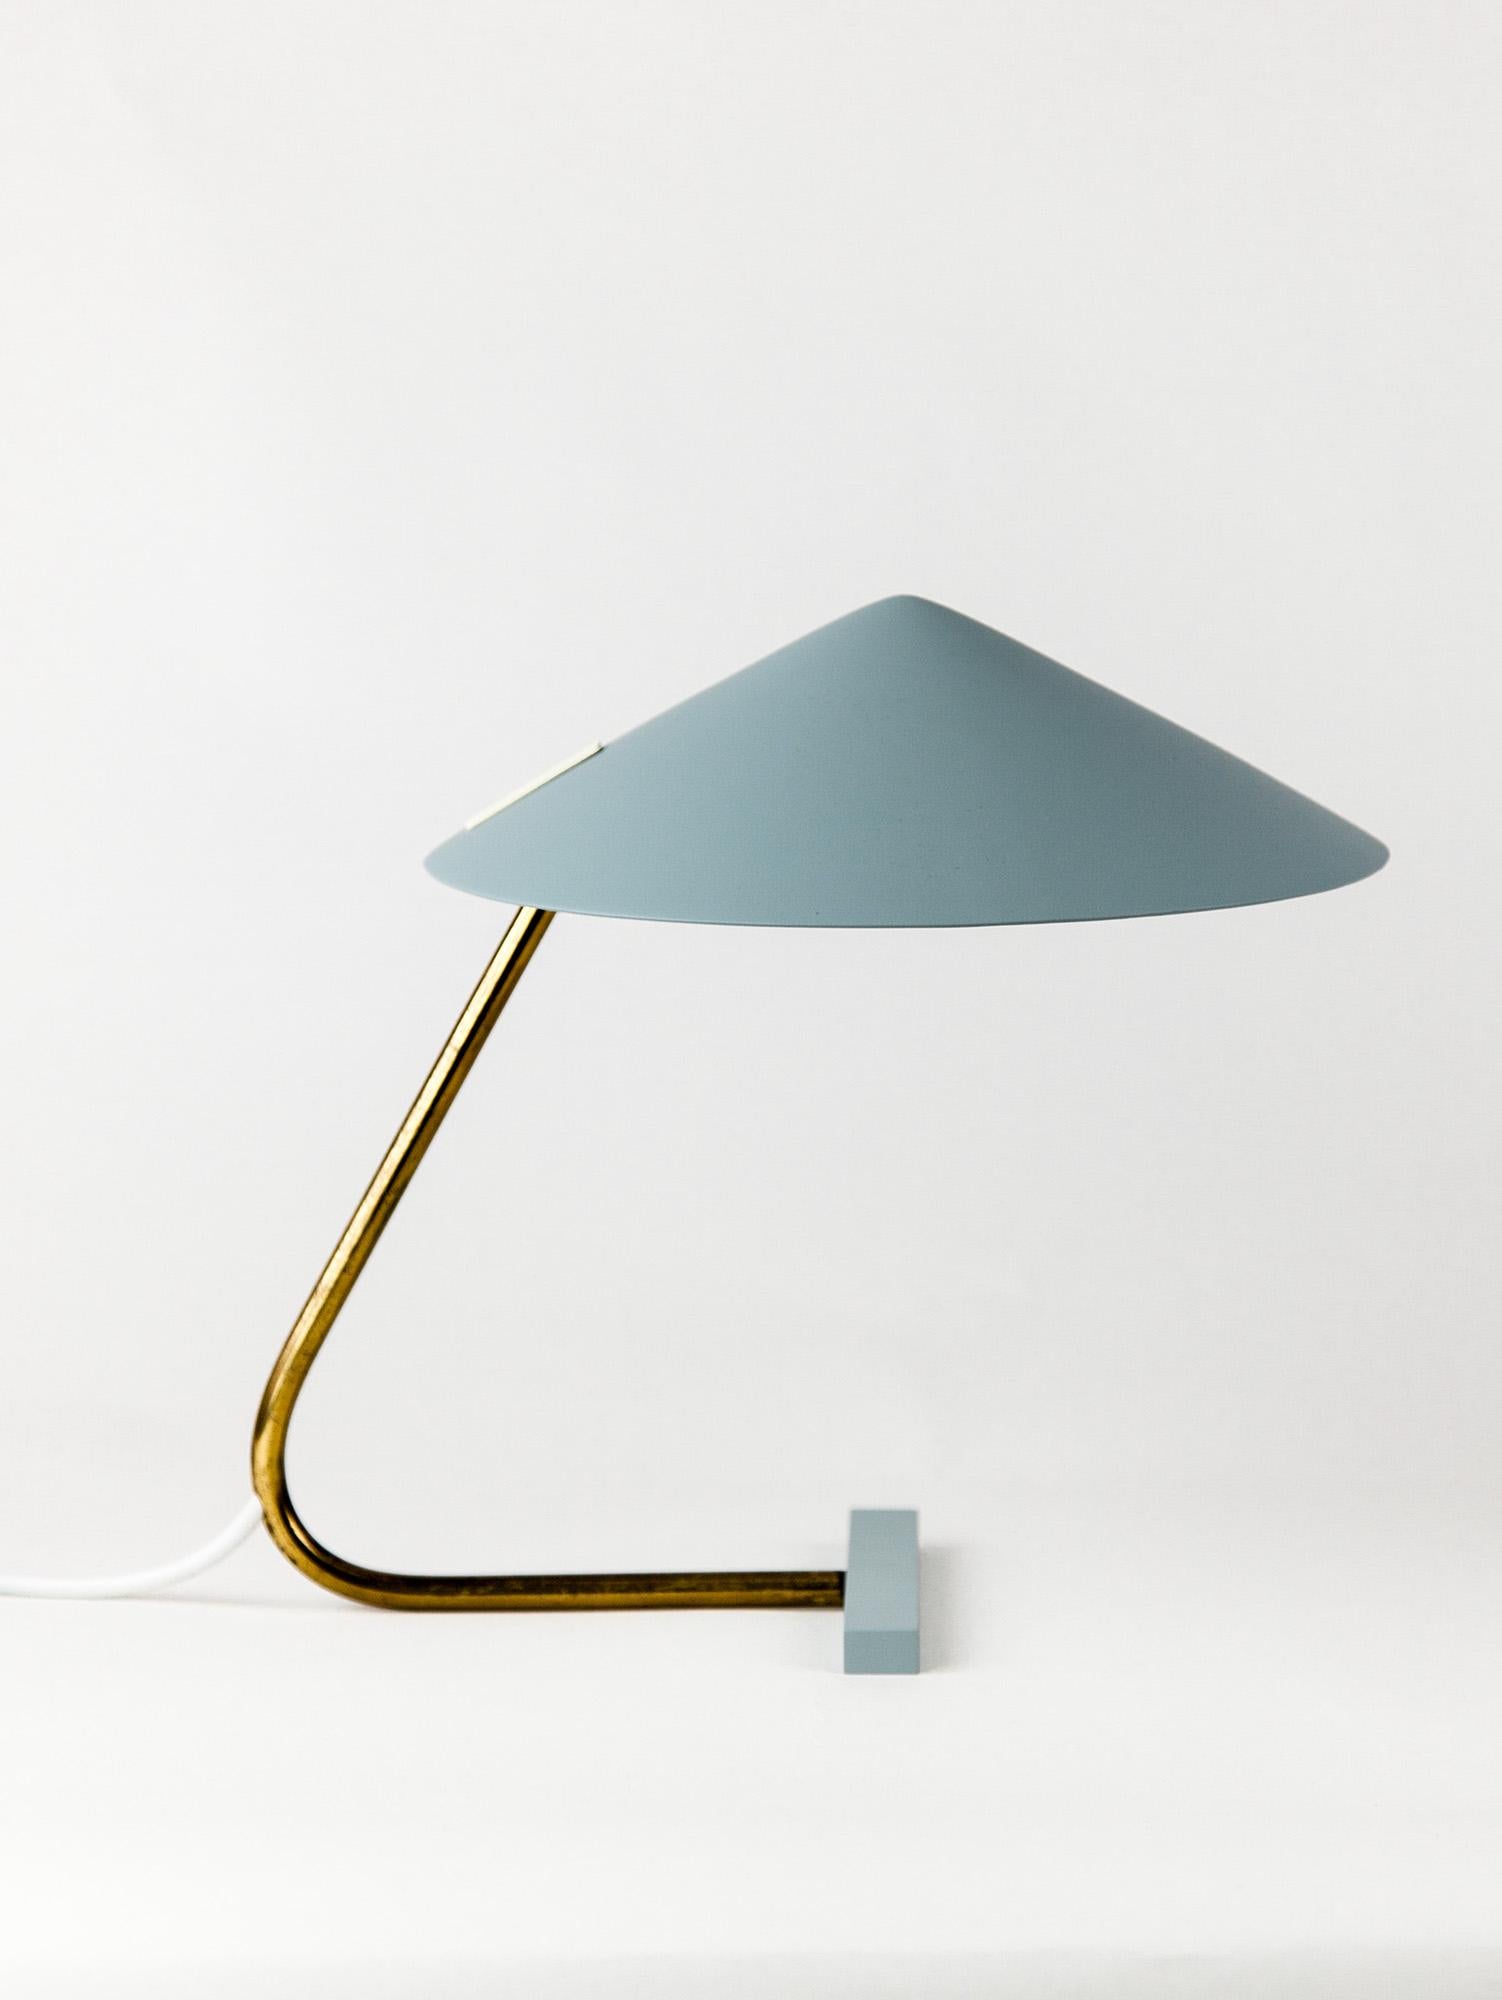 Vintage Italian table lamp by Stilux Milano with an aluminum shade and solid brass details. Its sleek modernist lines and grayish-green coloring epitomize Italian mid-century design and is as sculptural as it is functional. The lampshade pivots up